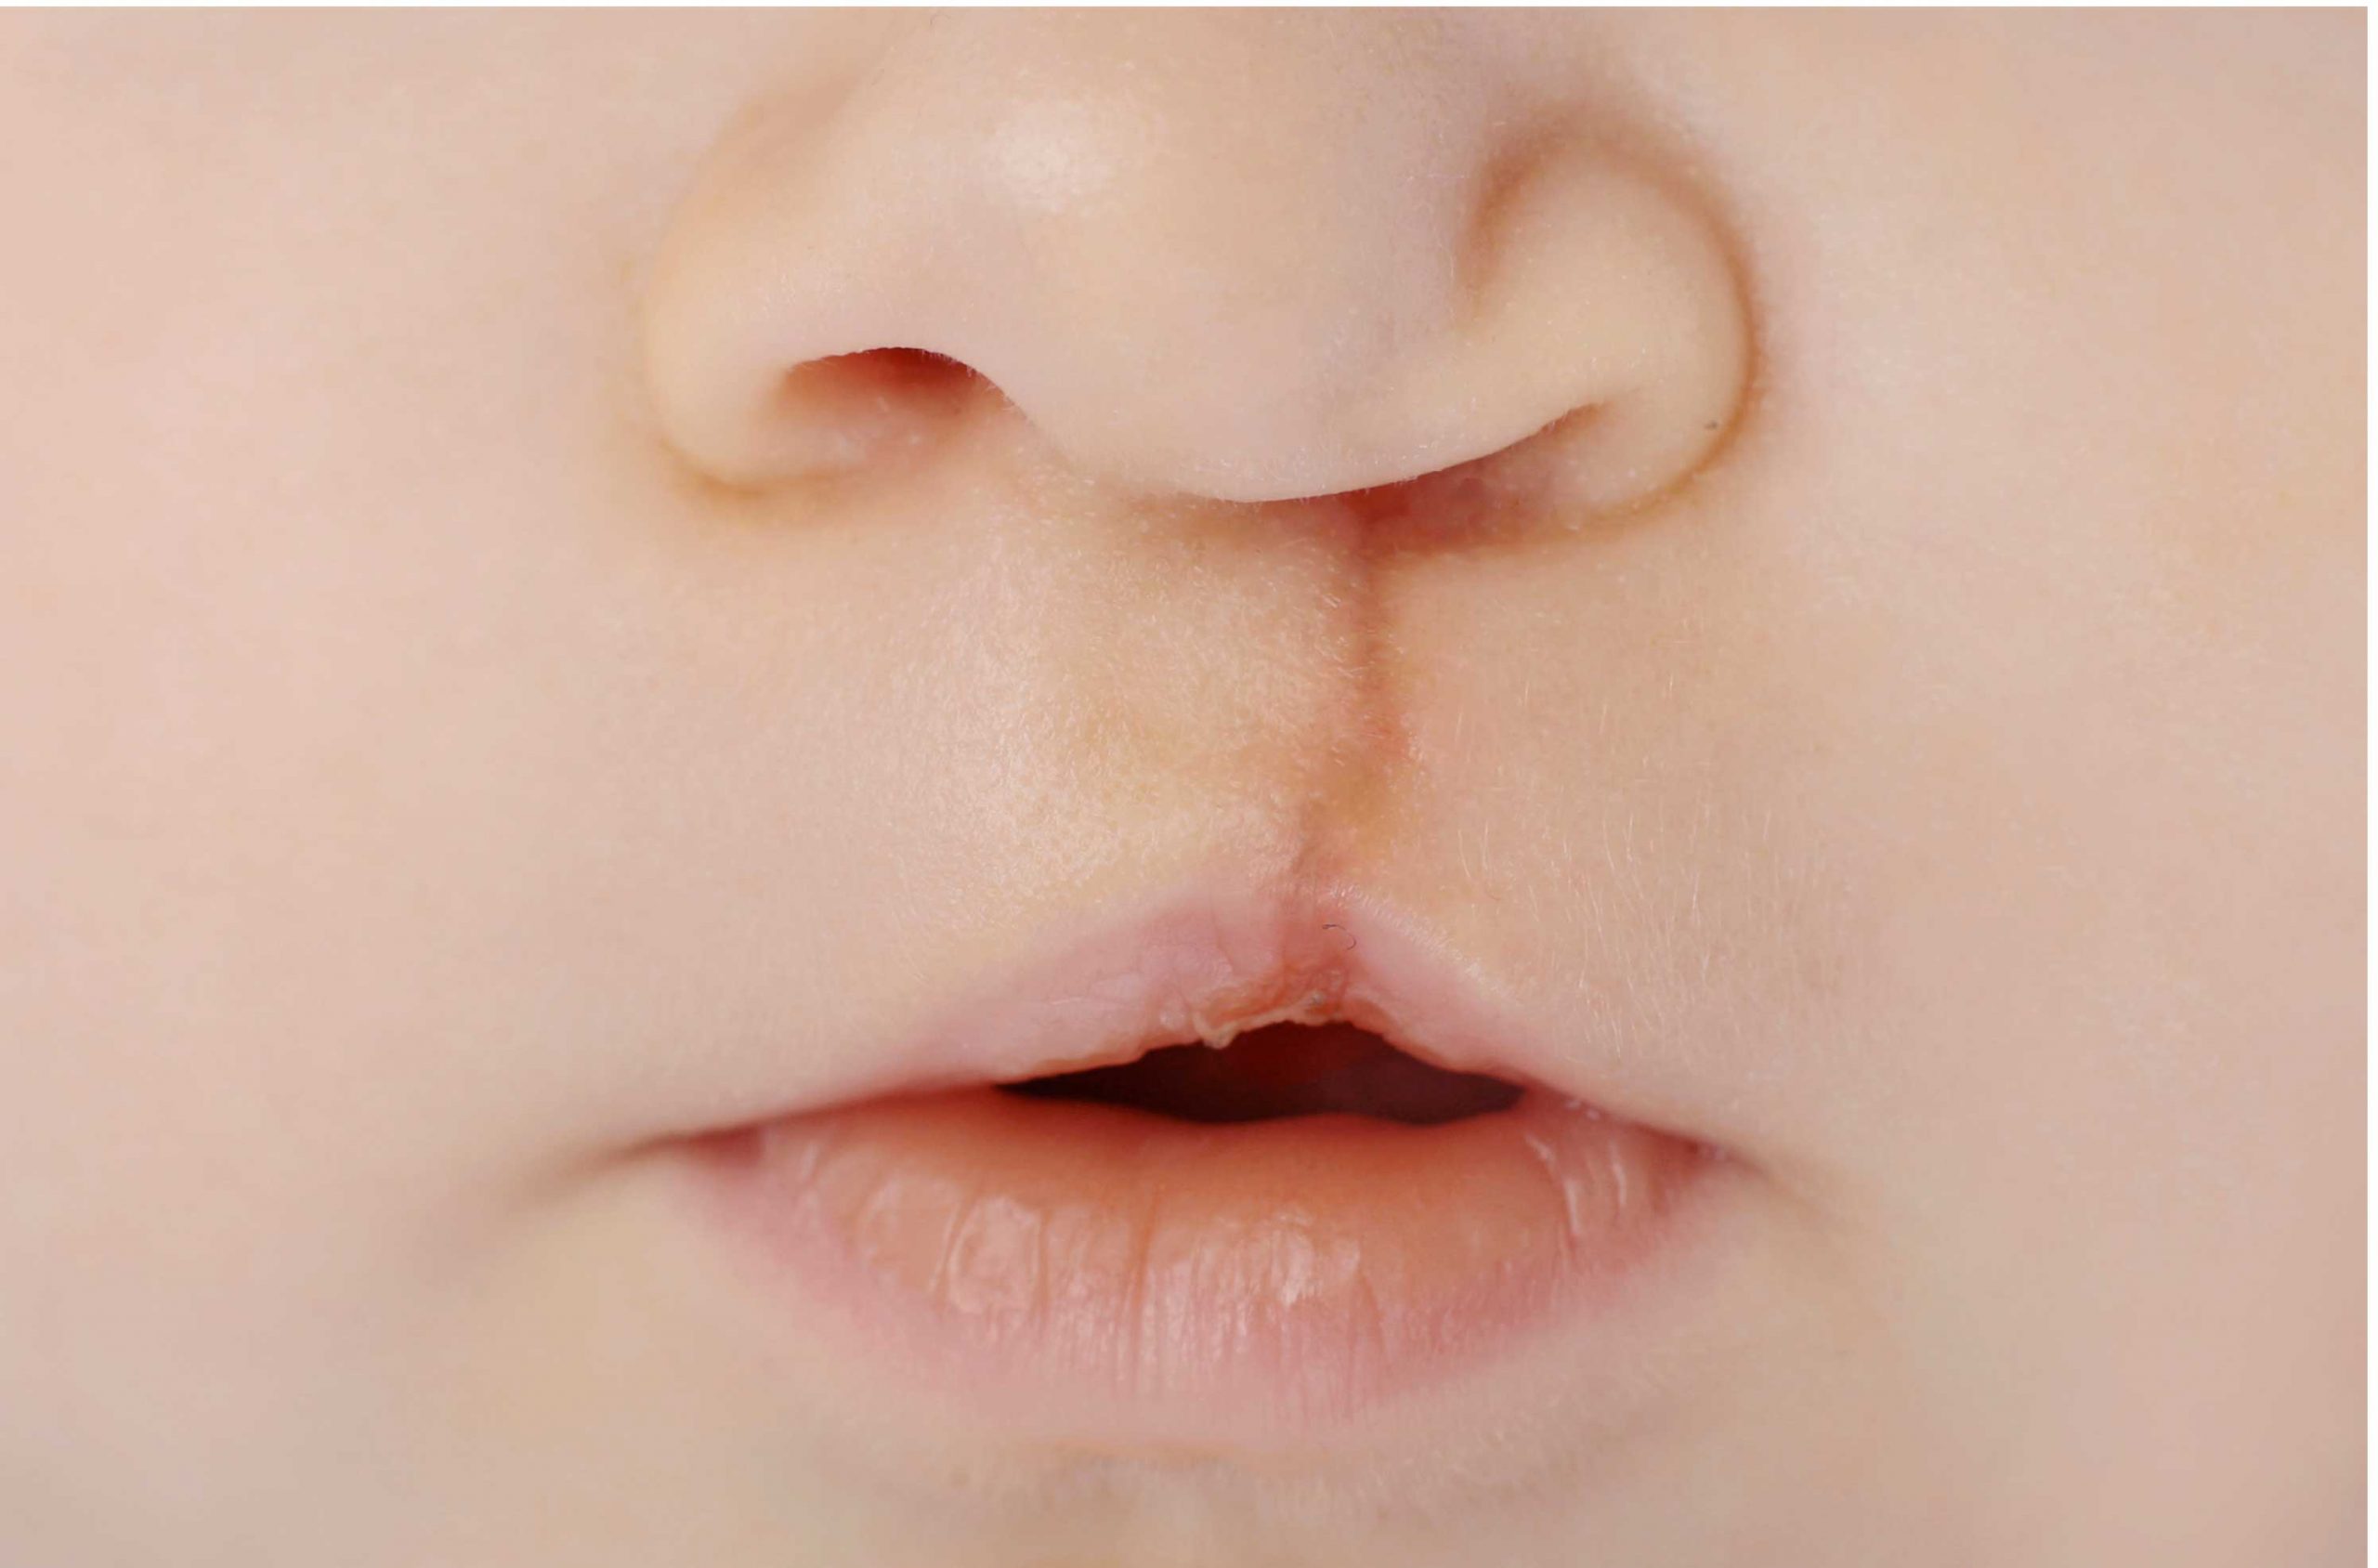 Cleft Palate Rectification Surgery in Howrah, super speciality hospital in howrah for Cleft Palate Rectification Surgery, free of cost Cleft Palate Rectification Surgery in Howrah, free Cleft Palate Rectification Surgery in kolkata, free Cleft Palate Rectification Surgery in west bengal